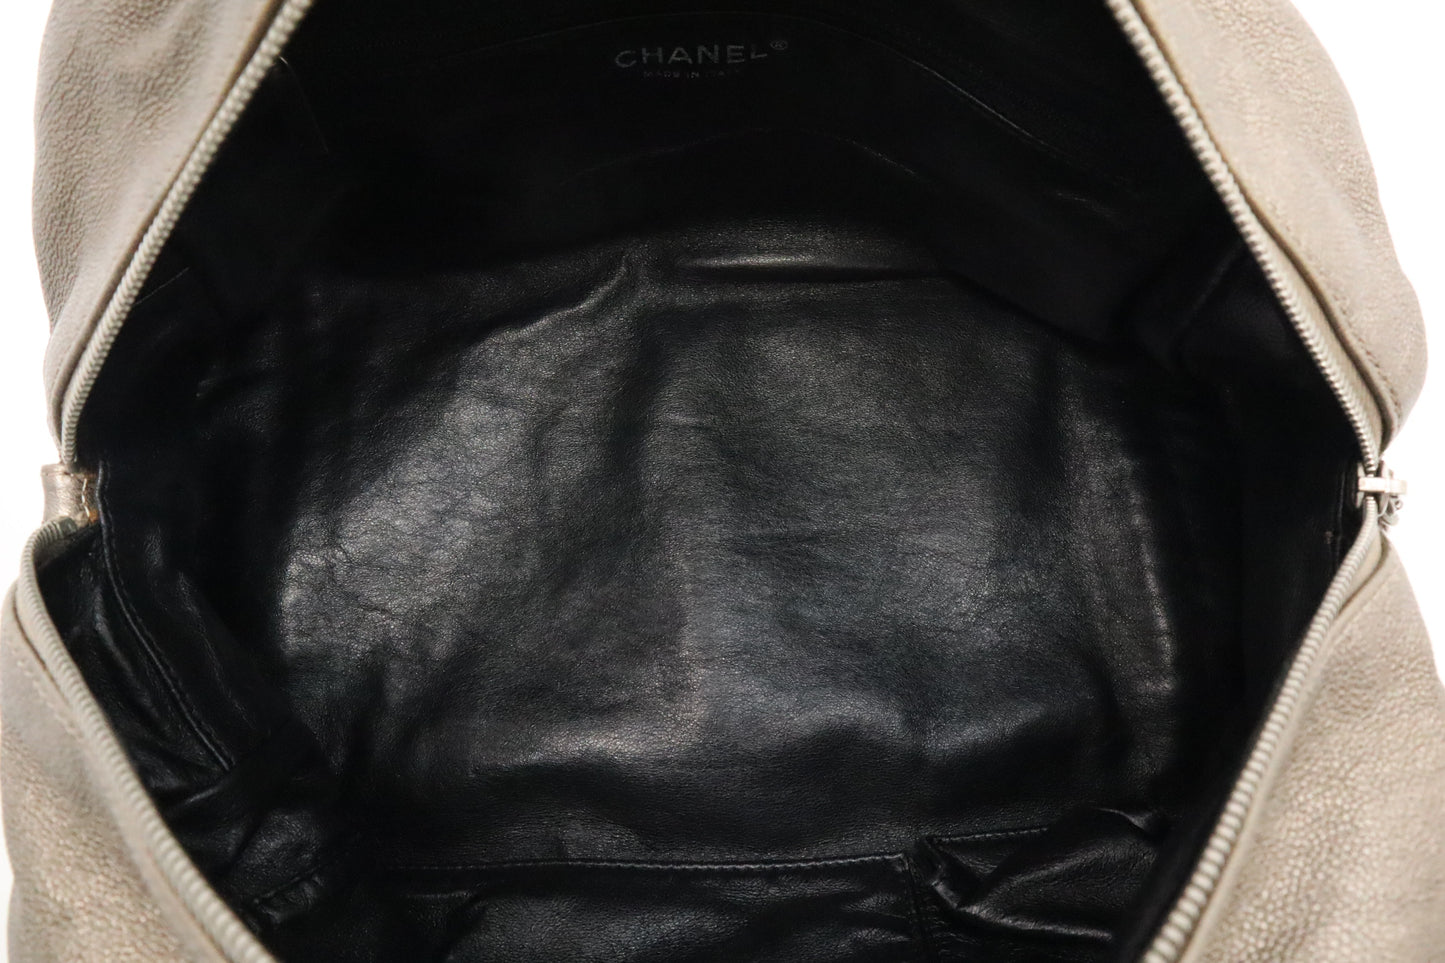 Chanel Ligne Luxe Bowler Bag in Pewter Leather